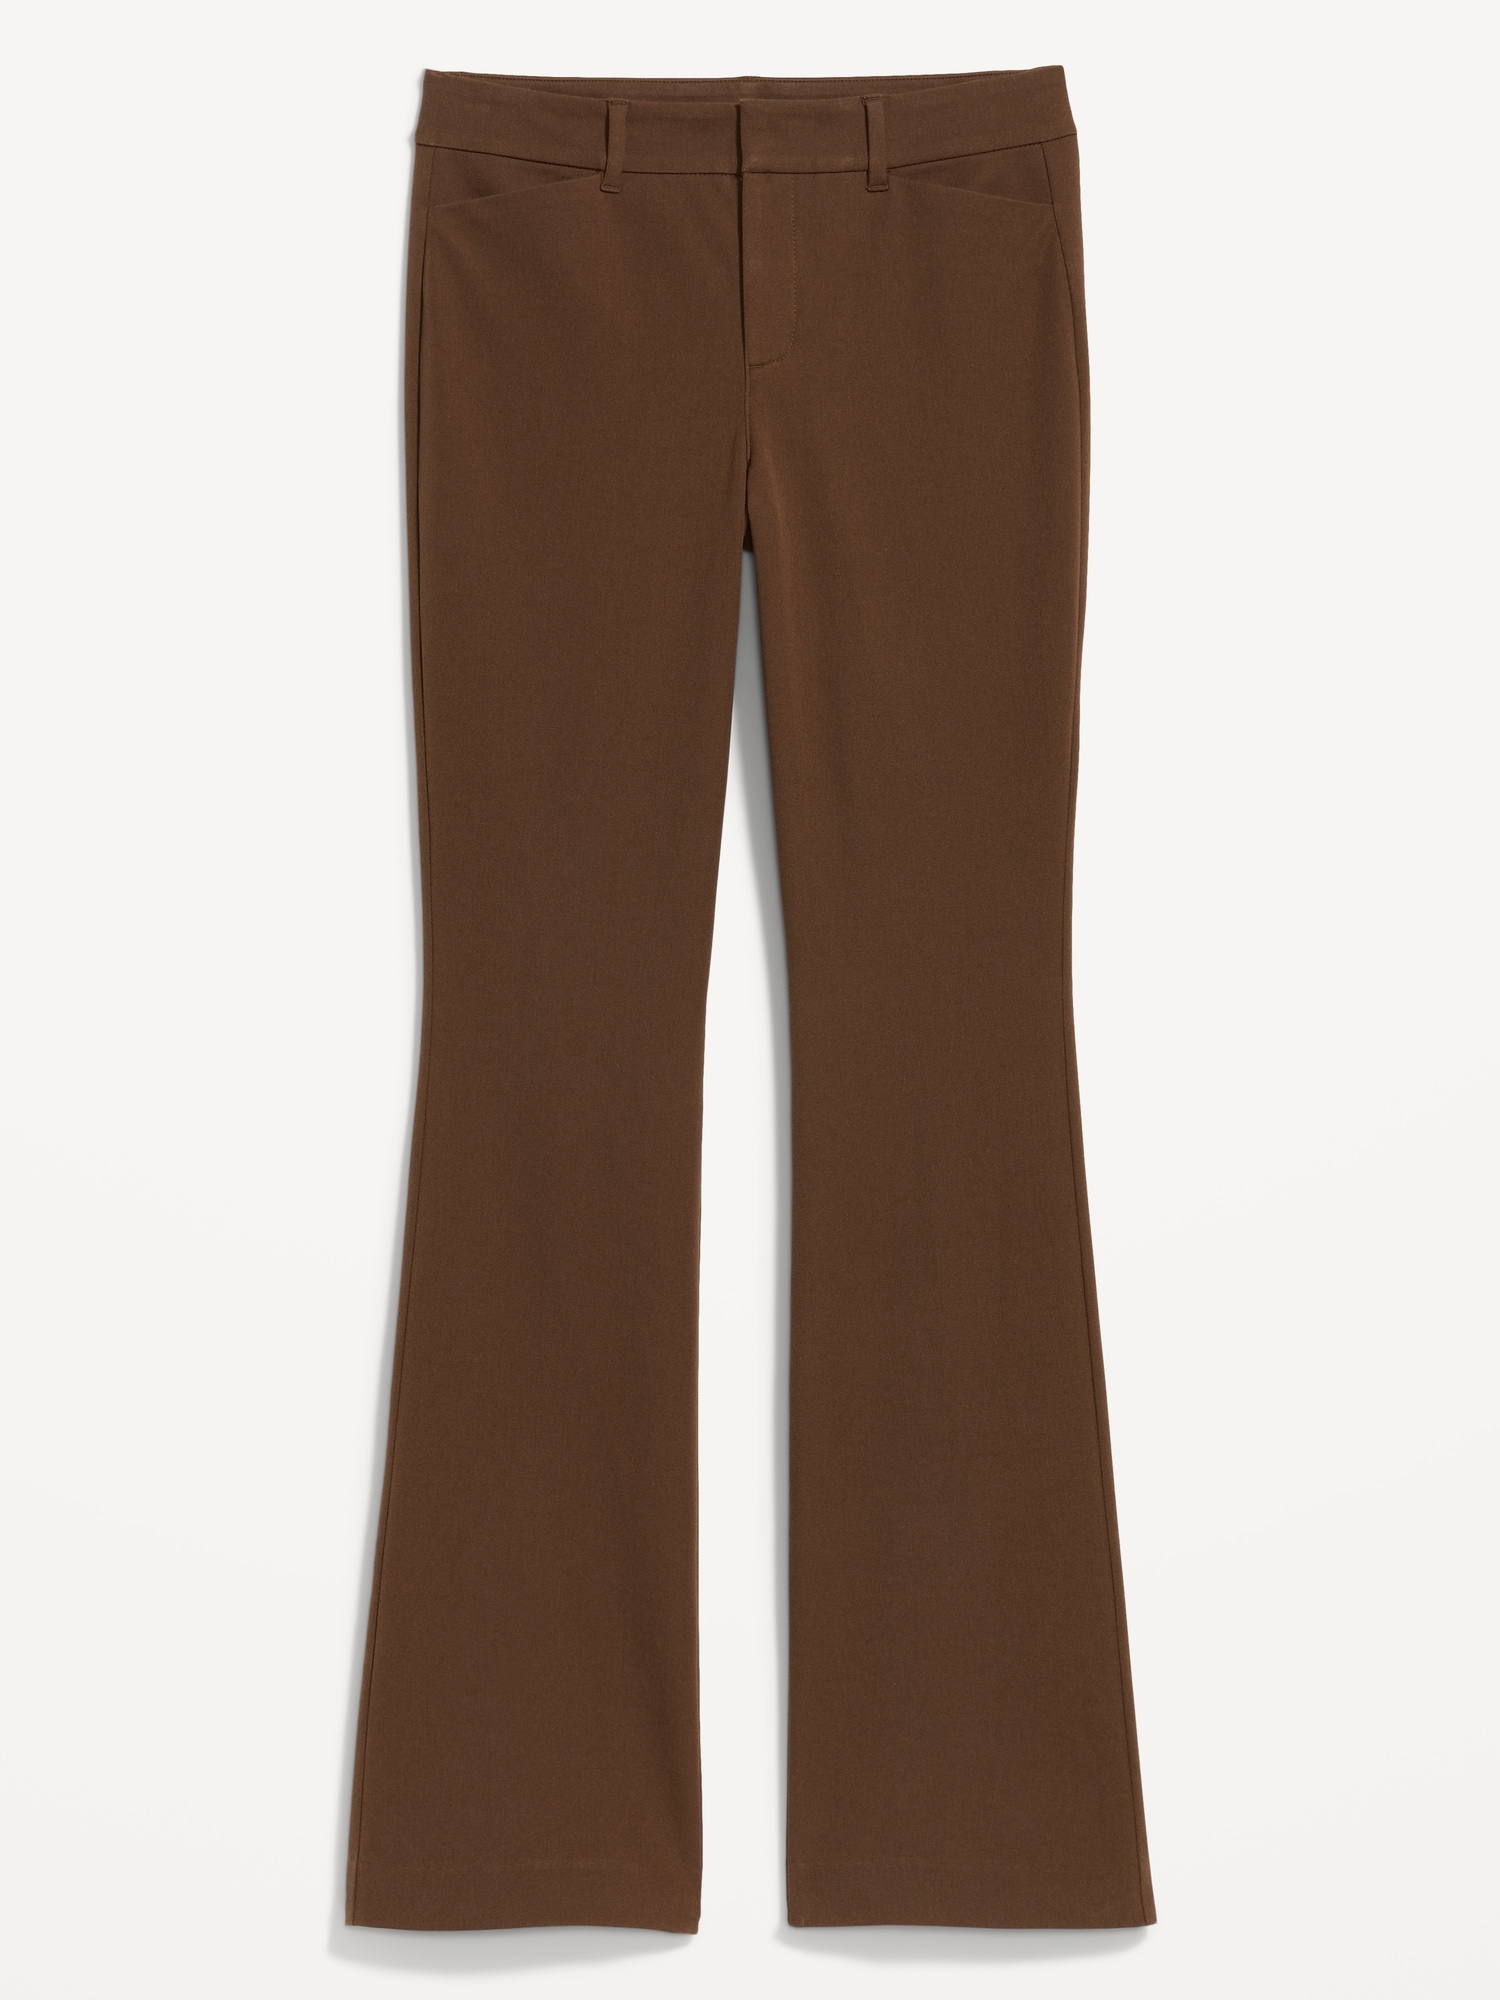 Secret Label Tan High Waisted Flare Corduroy Trousers